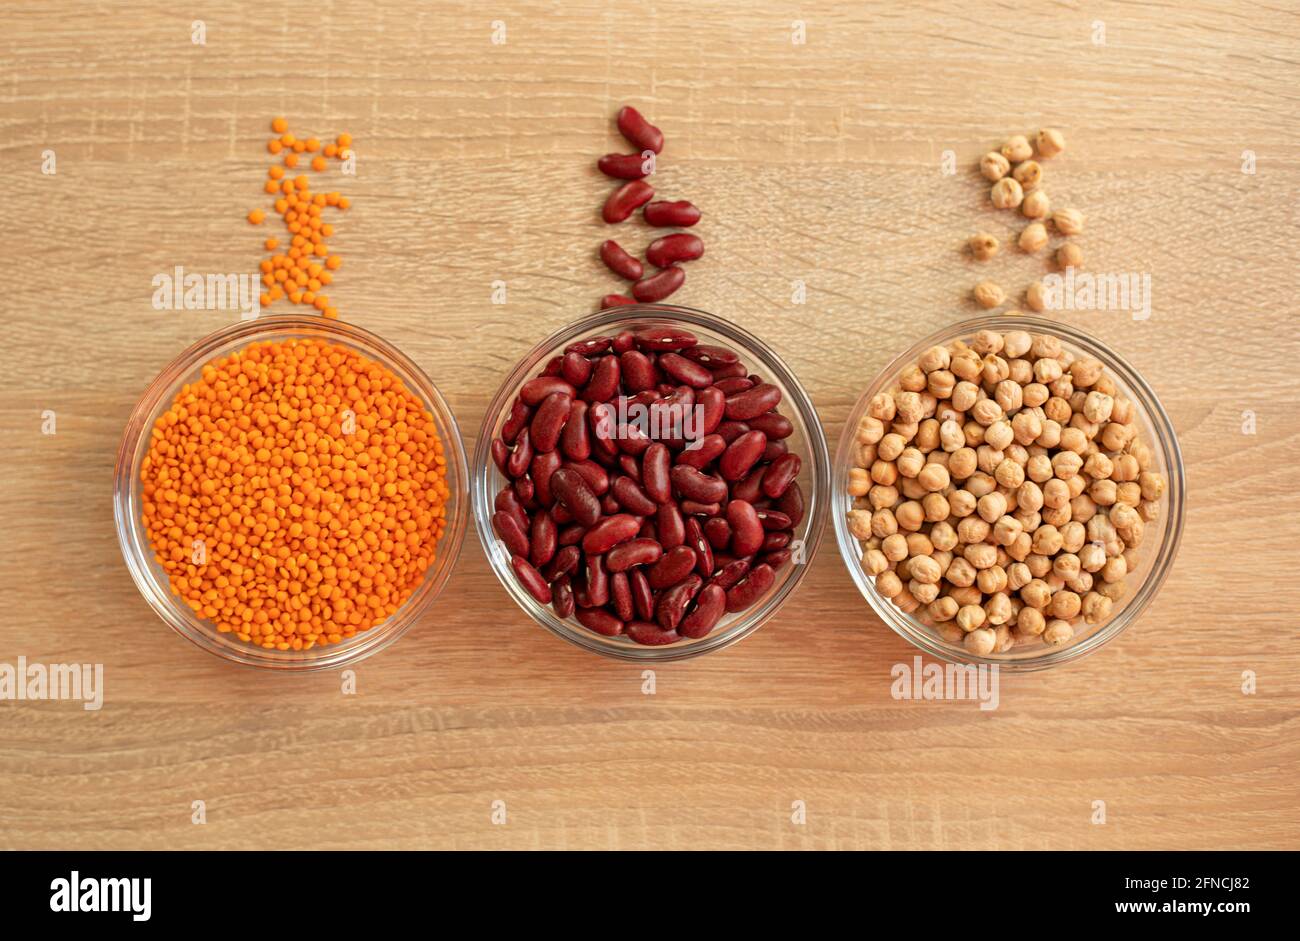 Bowls of cereal grains chickpeas, red lentils, red bean Stock Photo